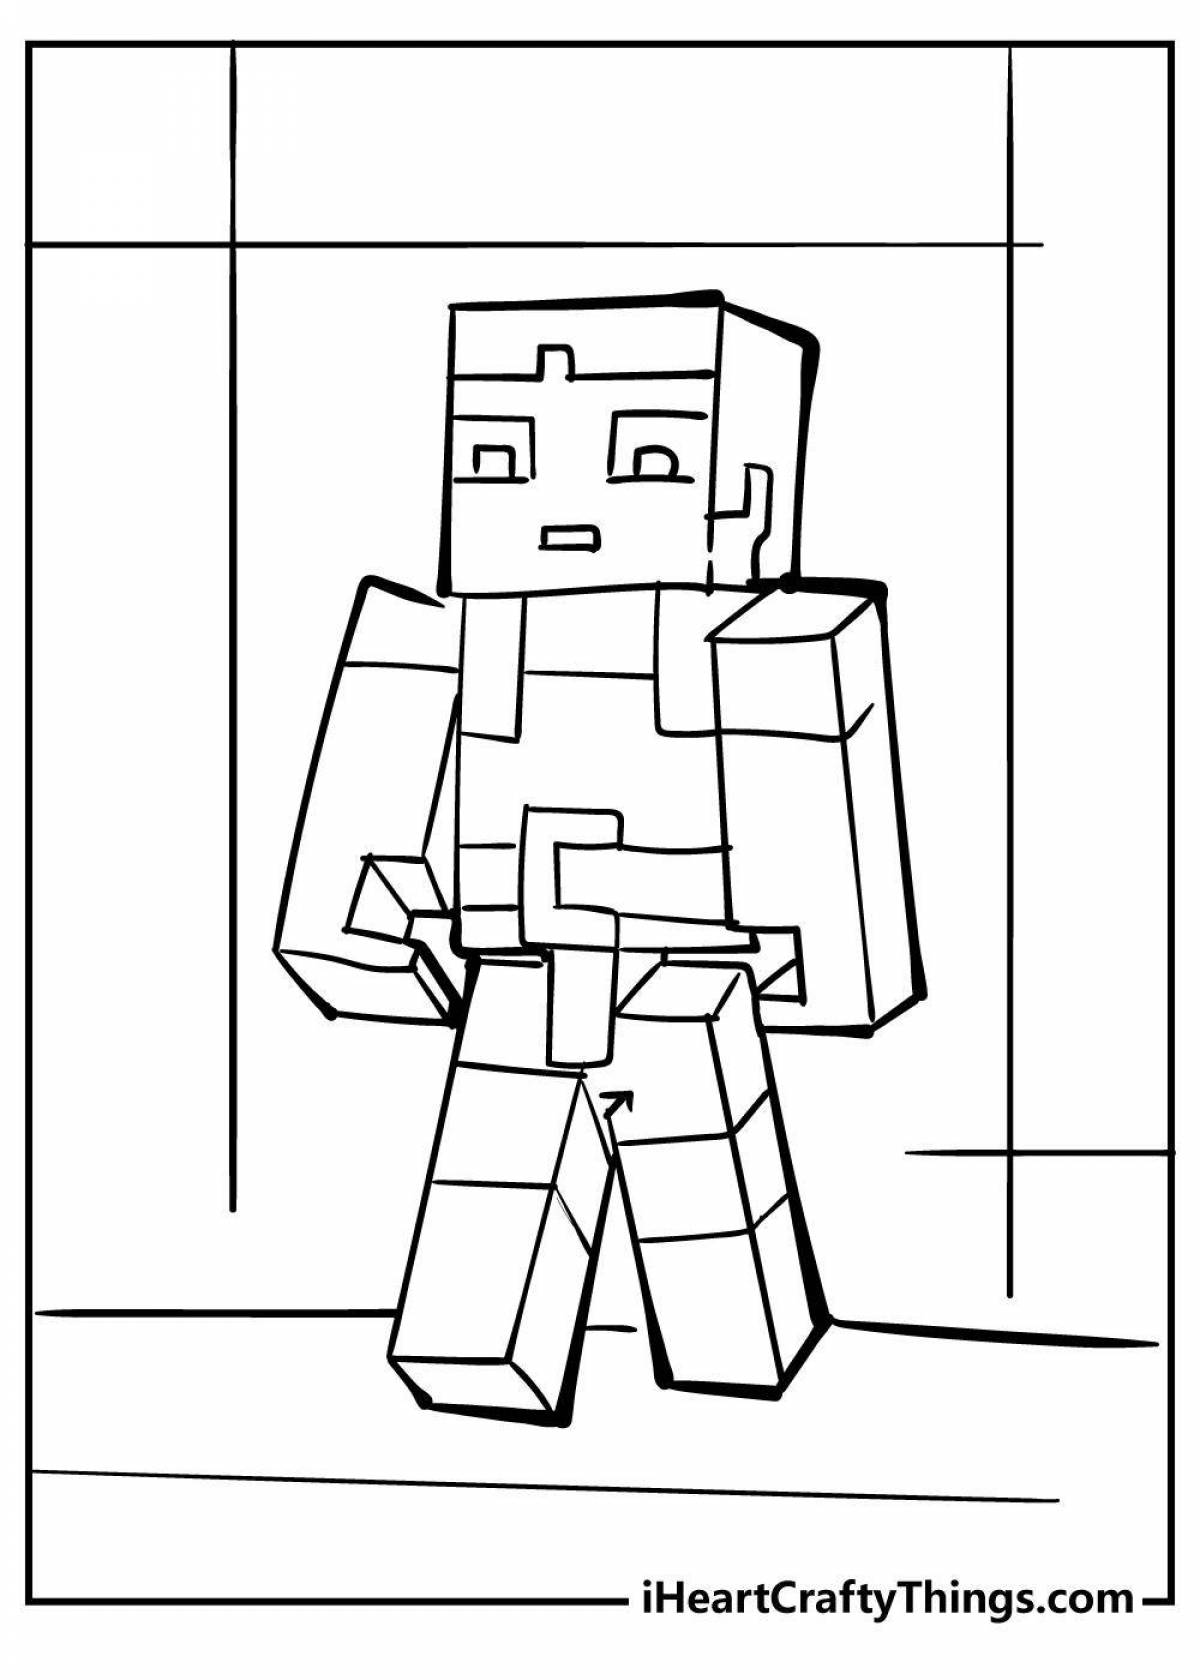 Fascinating minecraft bunny coloring page